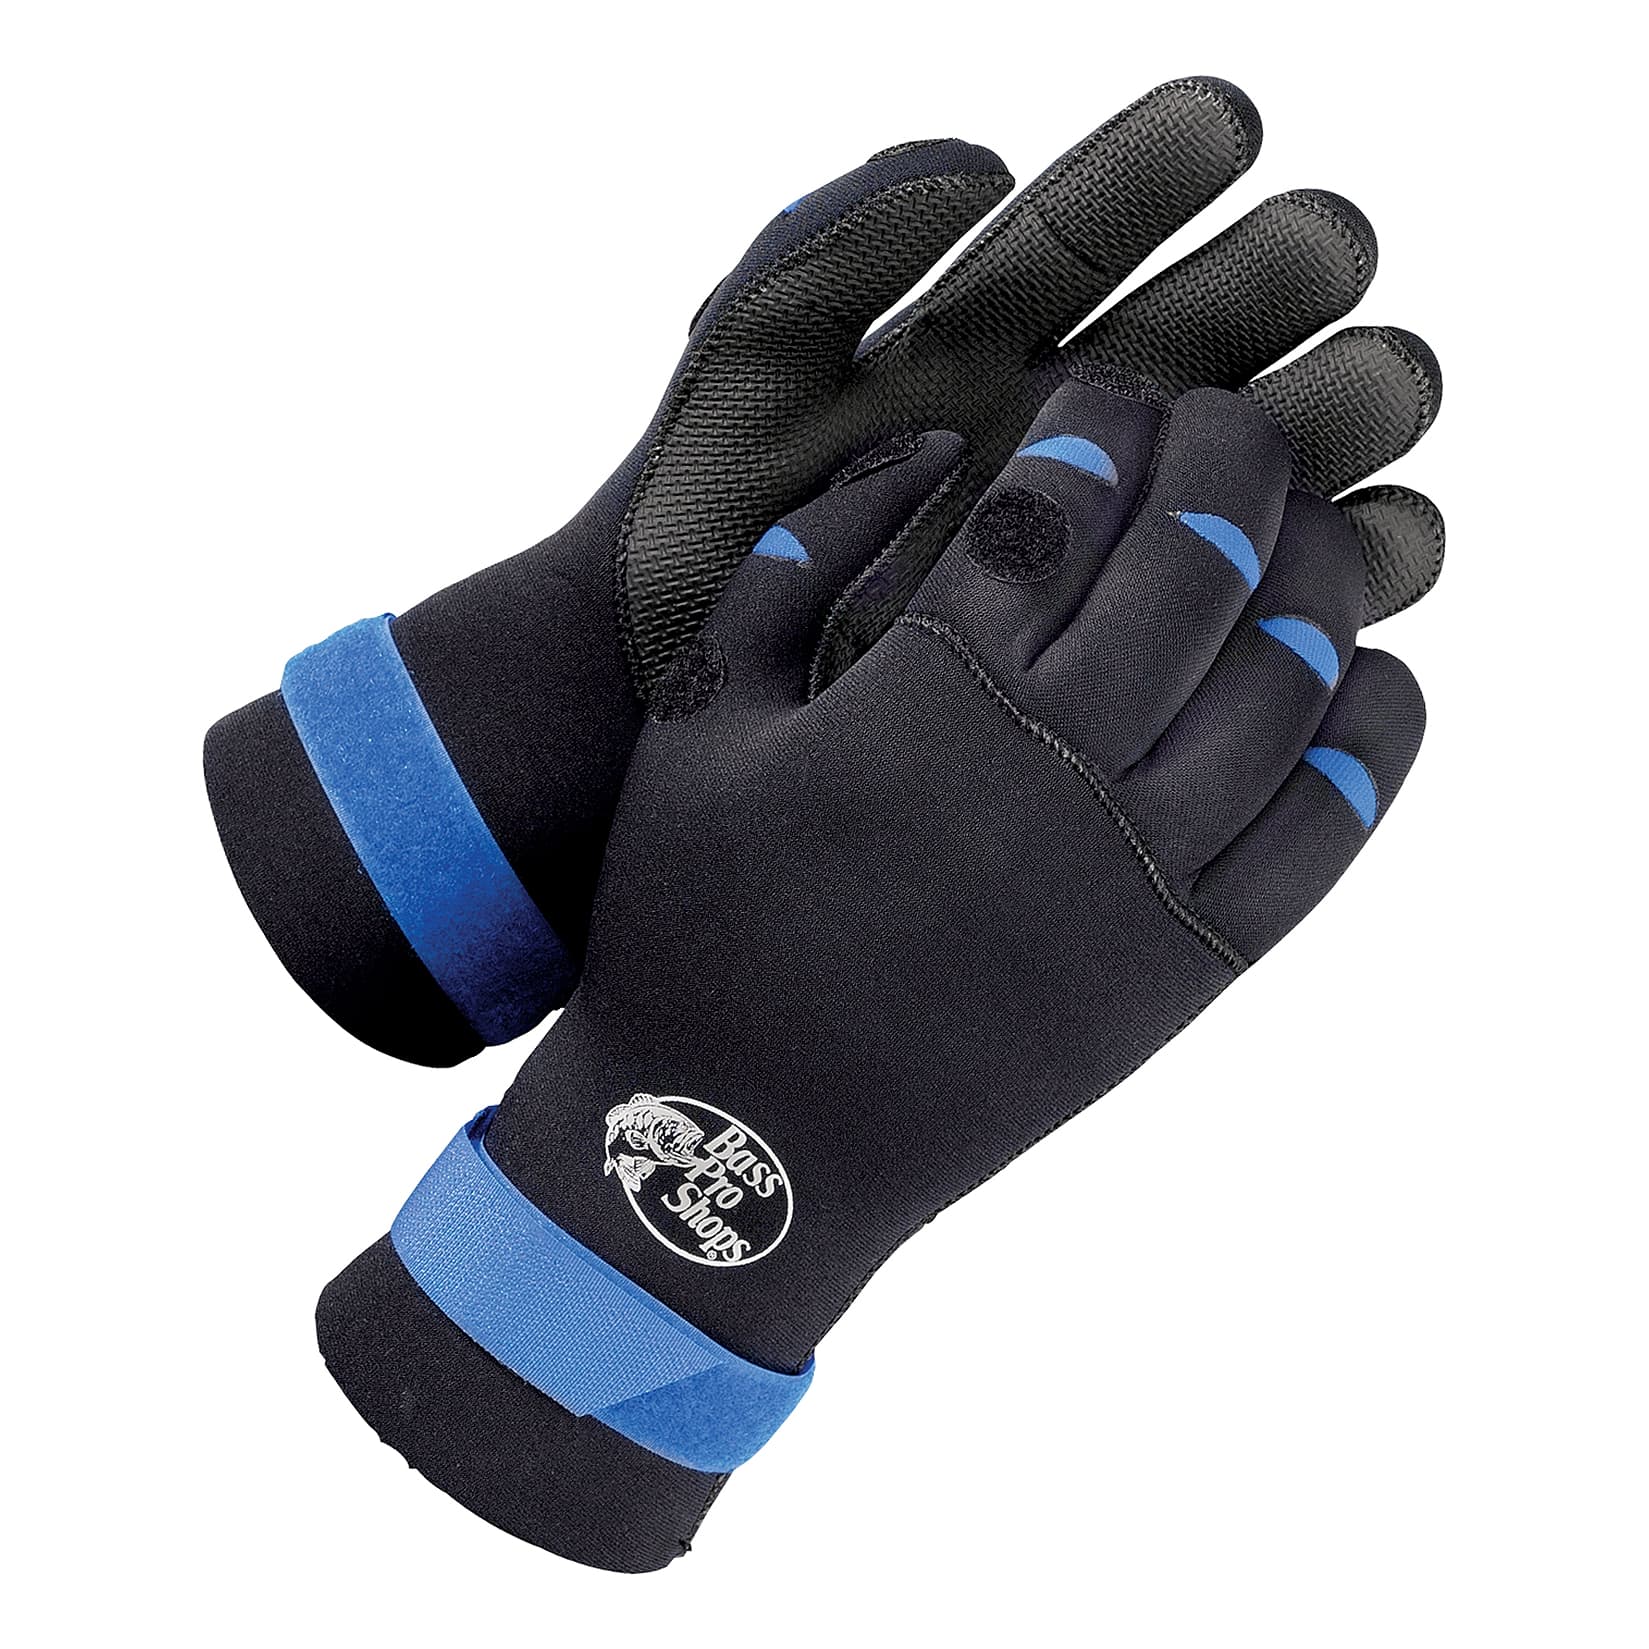 Equipment Fishing Accessories Cycling Gloves Fingerless Gloves